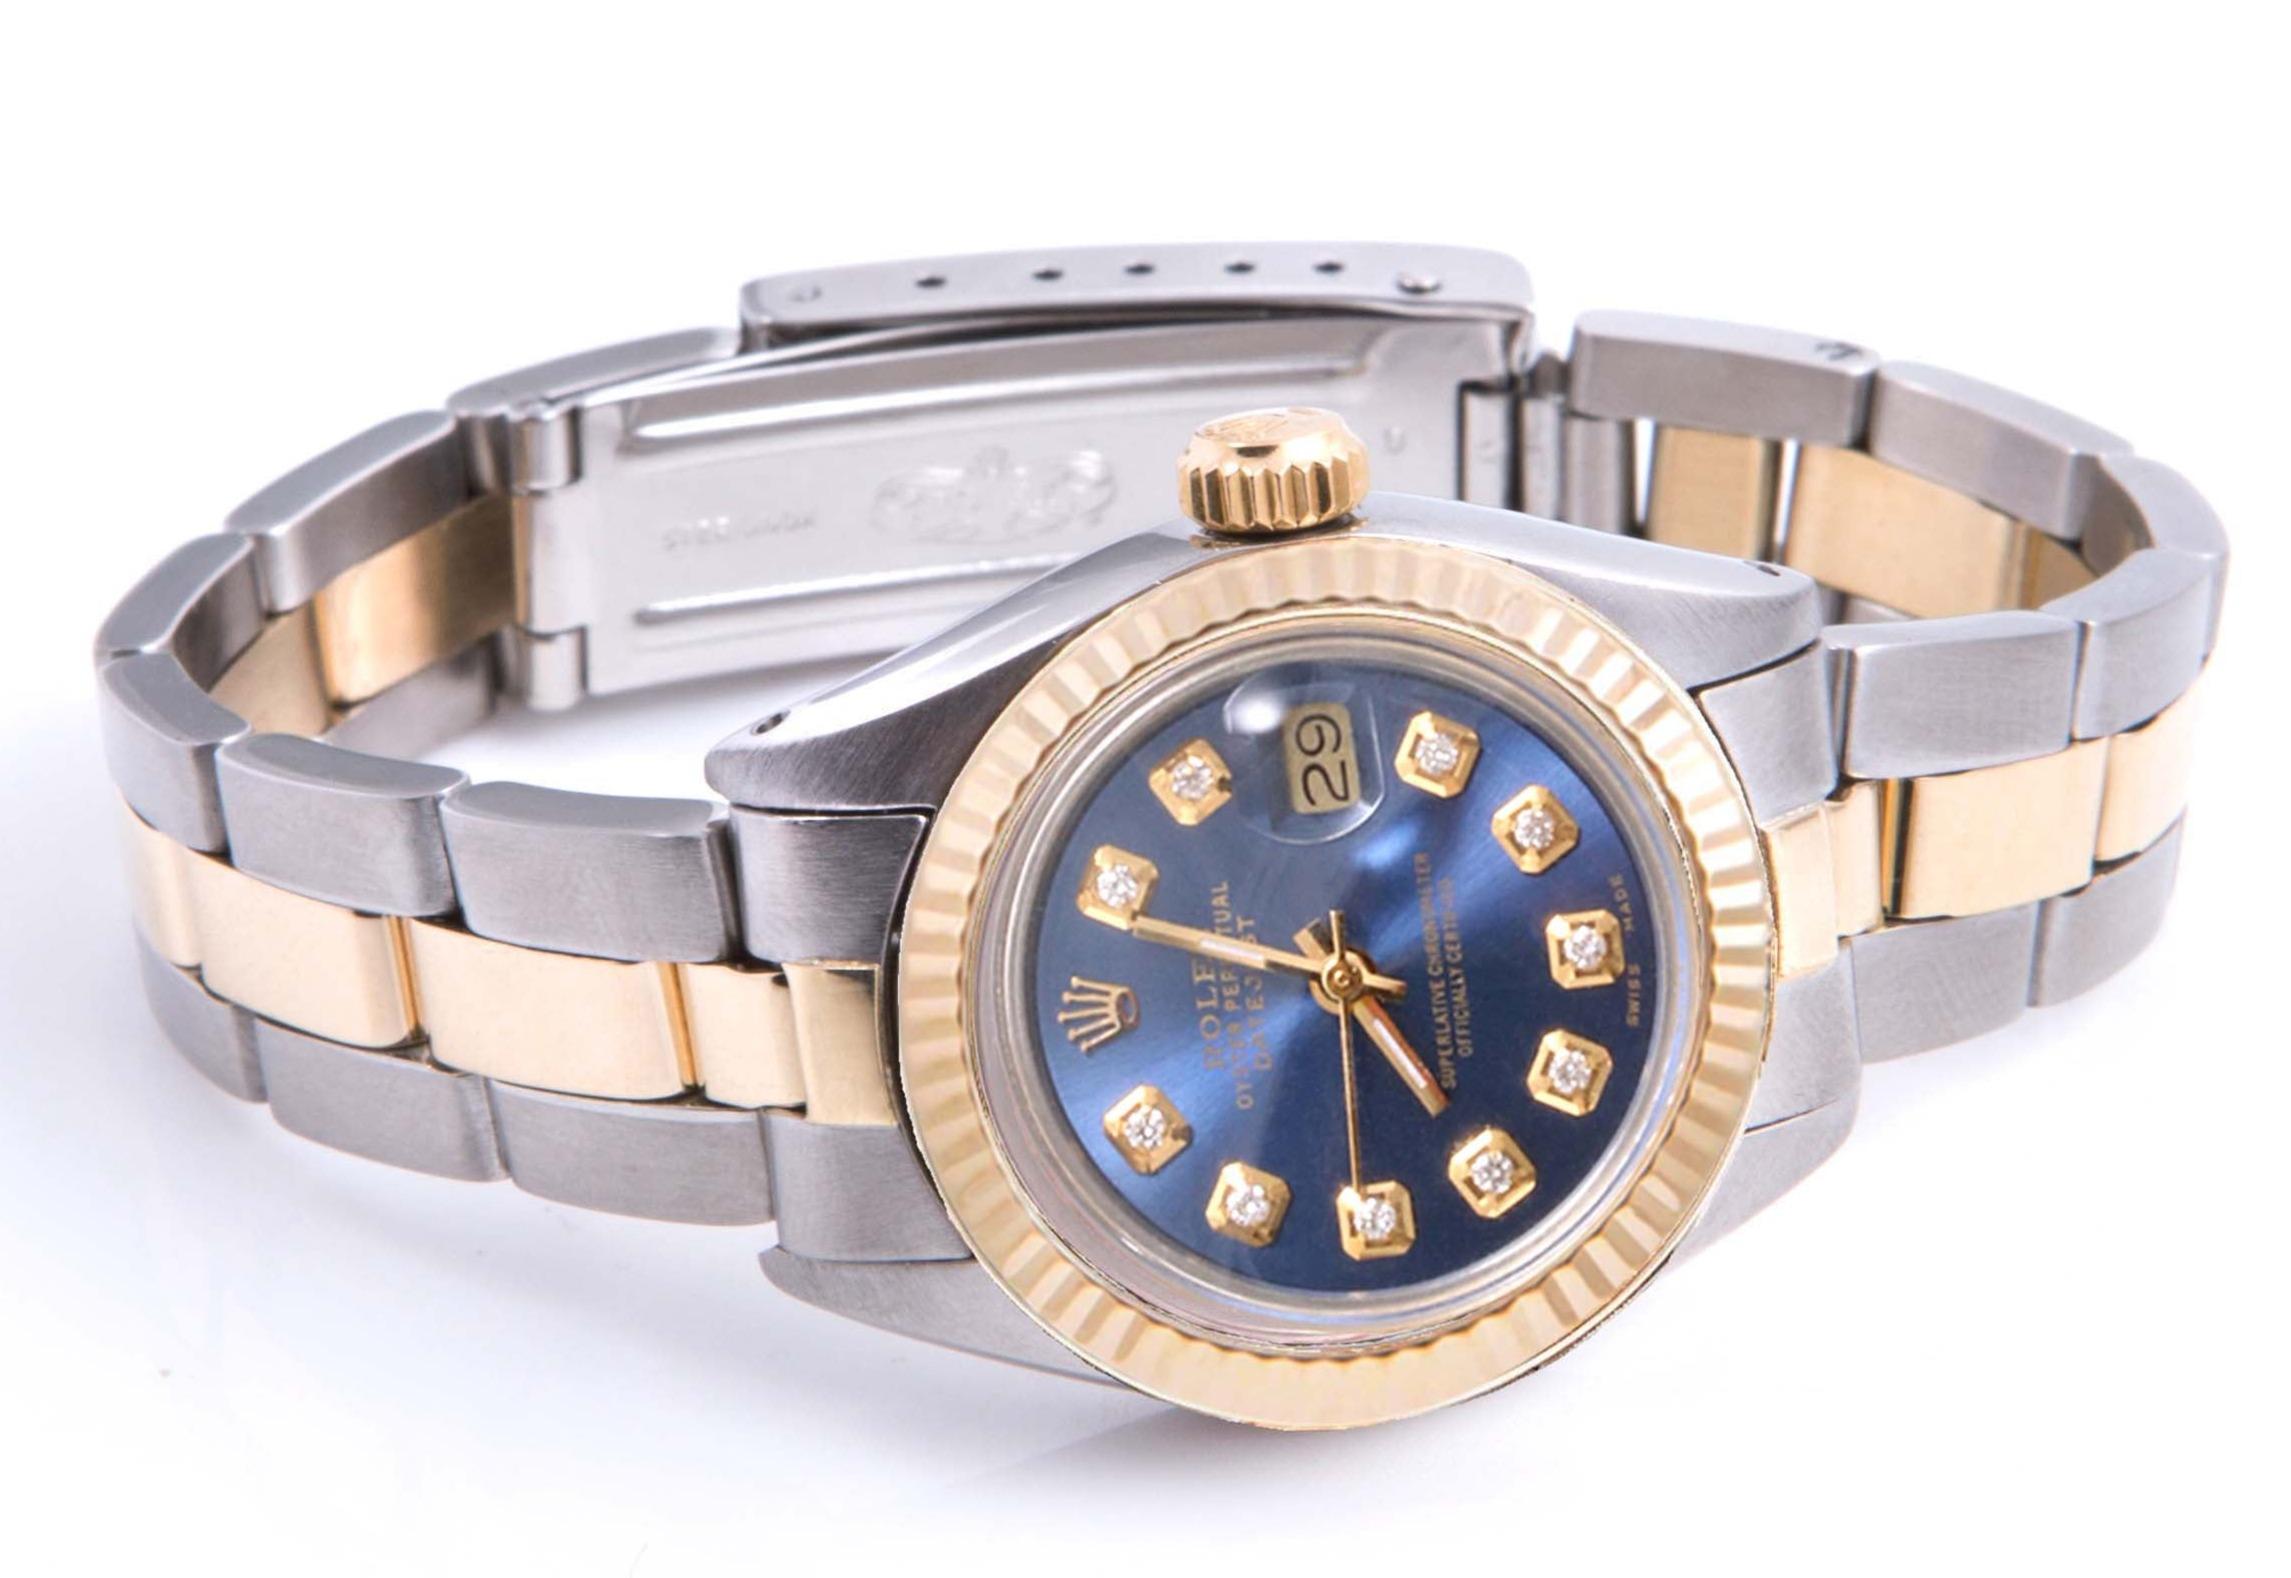 (Watch Description) 
Brand - Rolex
Gender - Ladies
Model - 6917 Datejust
Metals - Yellow gold / steel
Case size - 26mm
Bezel - Yellow Gold Fluted
Crystal - Acrylic
Movement - Automatic Cal.2035
Dial - Custom Blue Diamond
Wrist band - Rolex Two-tone